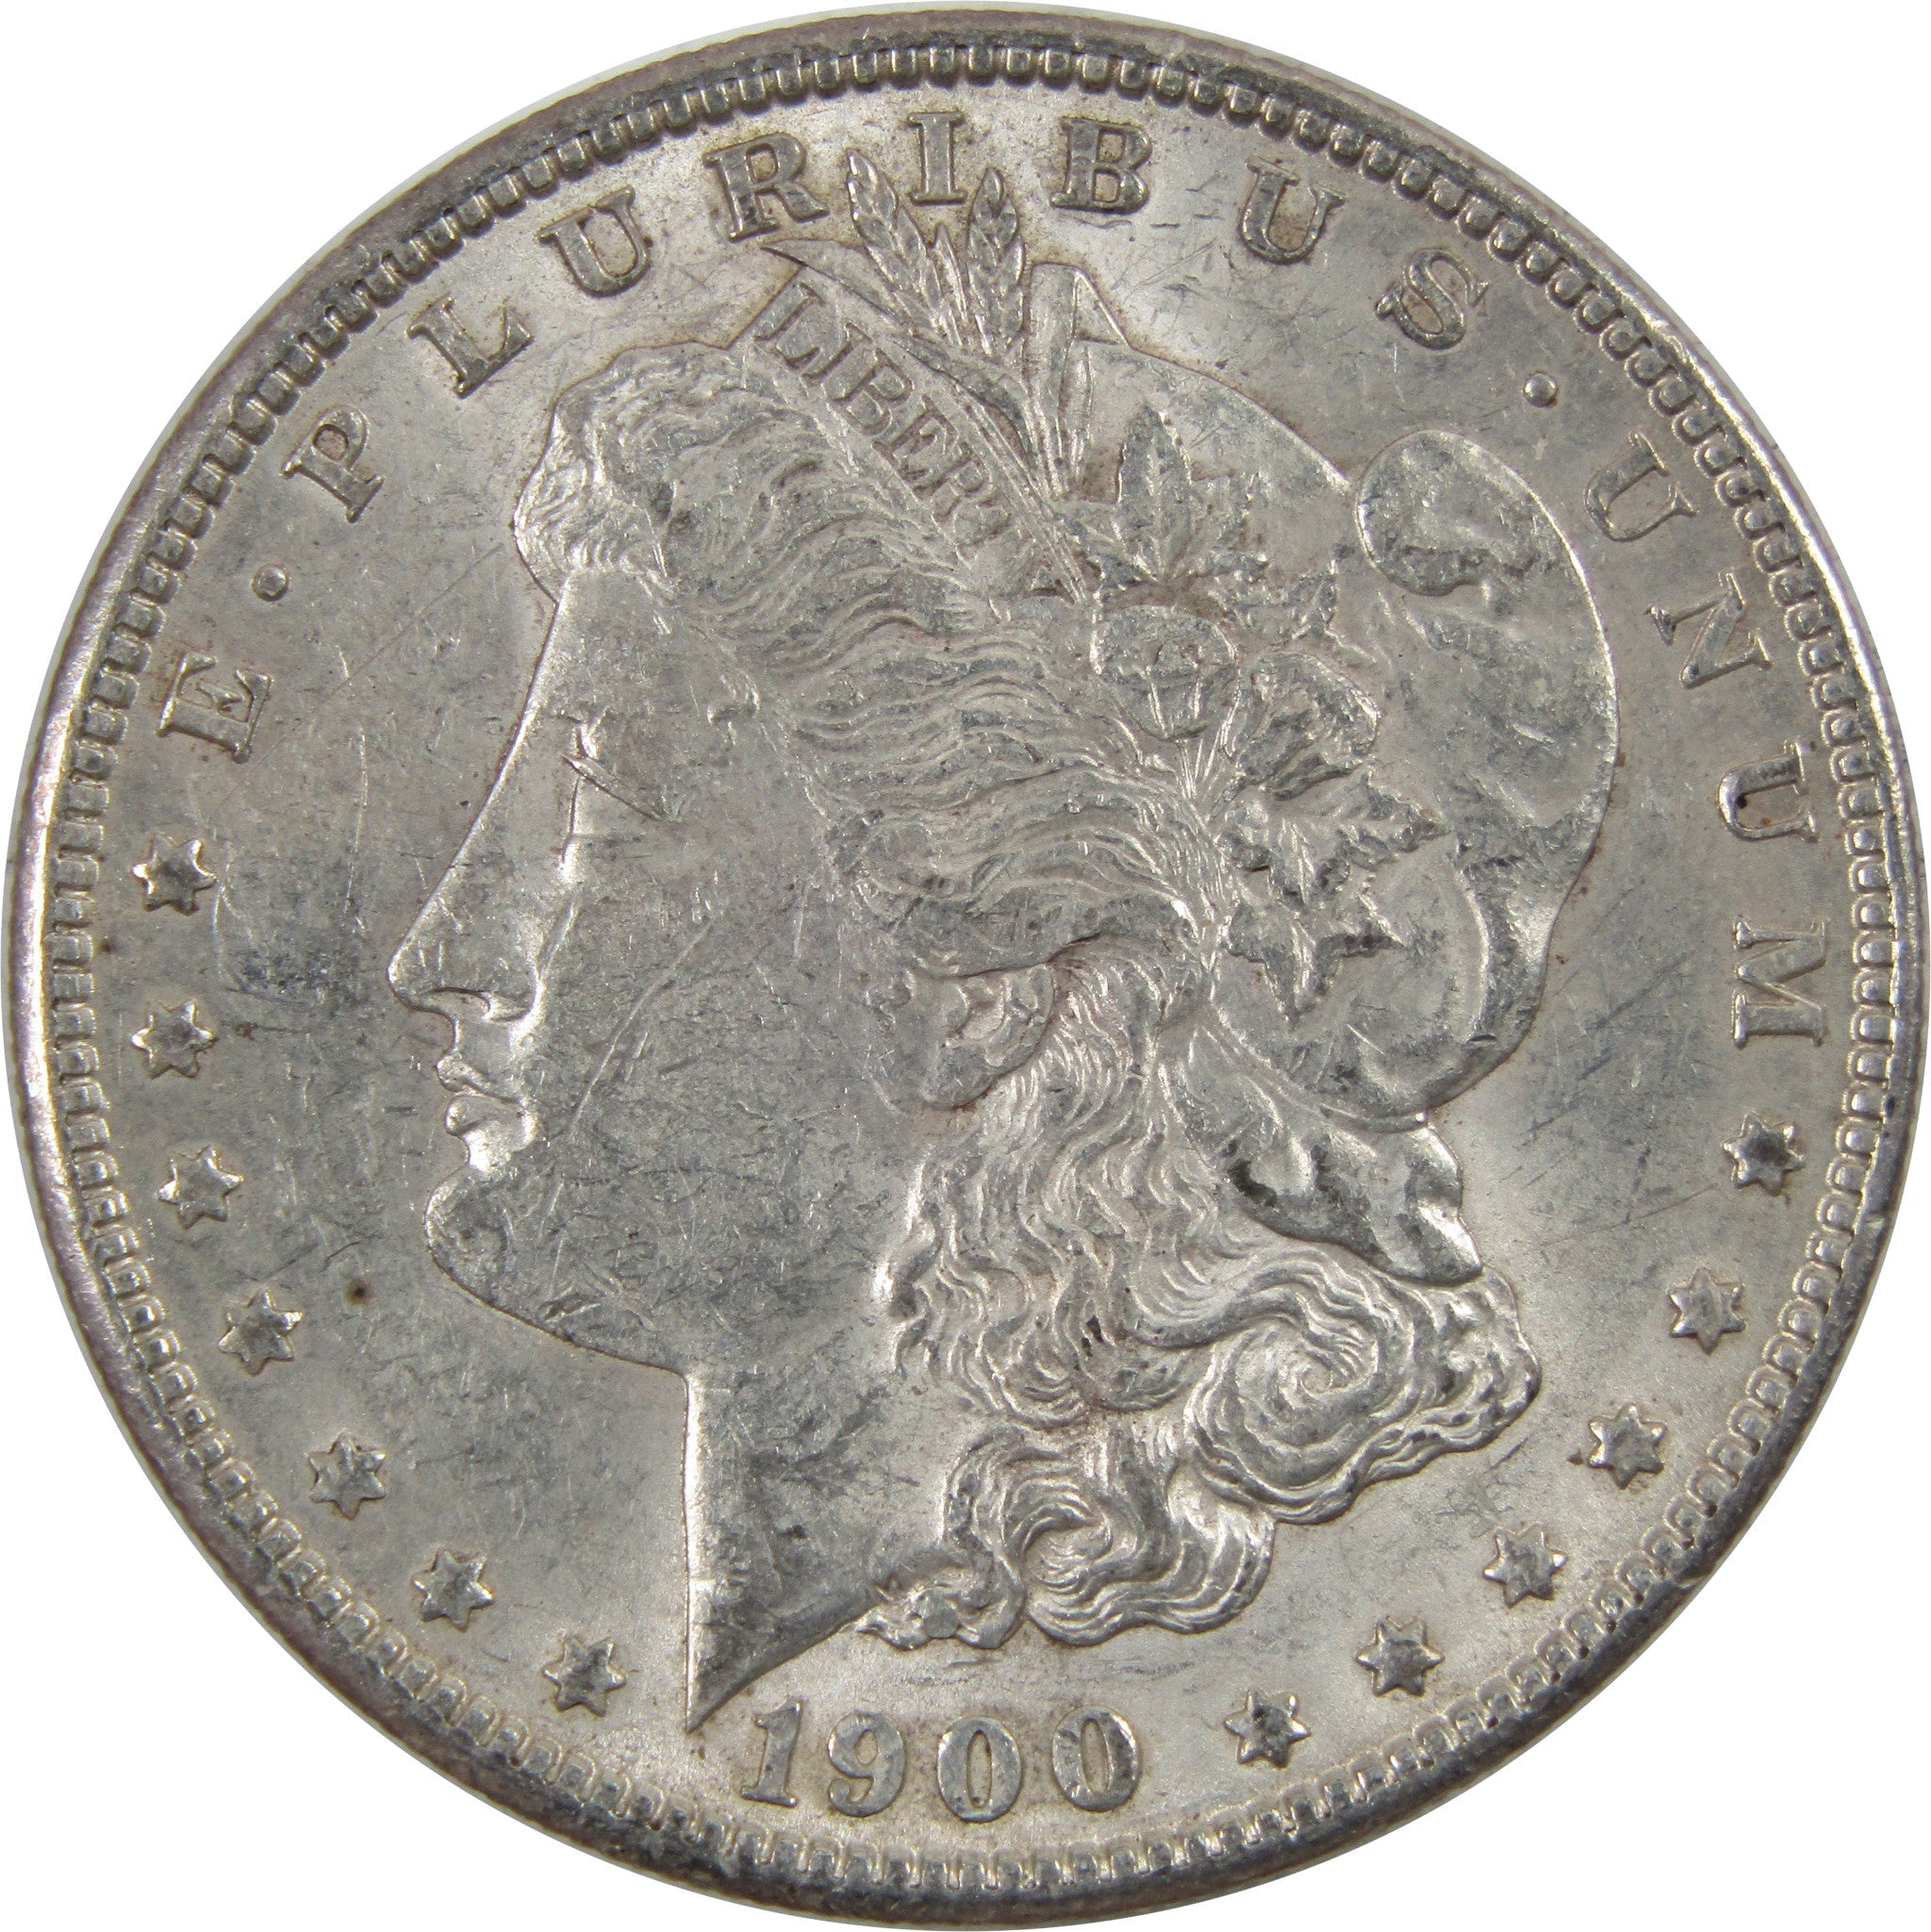 1900 Morgan Dollar AU About Uncirculated 90% Silver $1 Coin SKU:I5512 - Morgan coin - Morgan silver dollar - Morgan silver dollar for sale - Profile Coins &amp; Collectibles